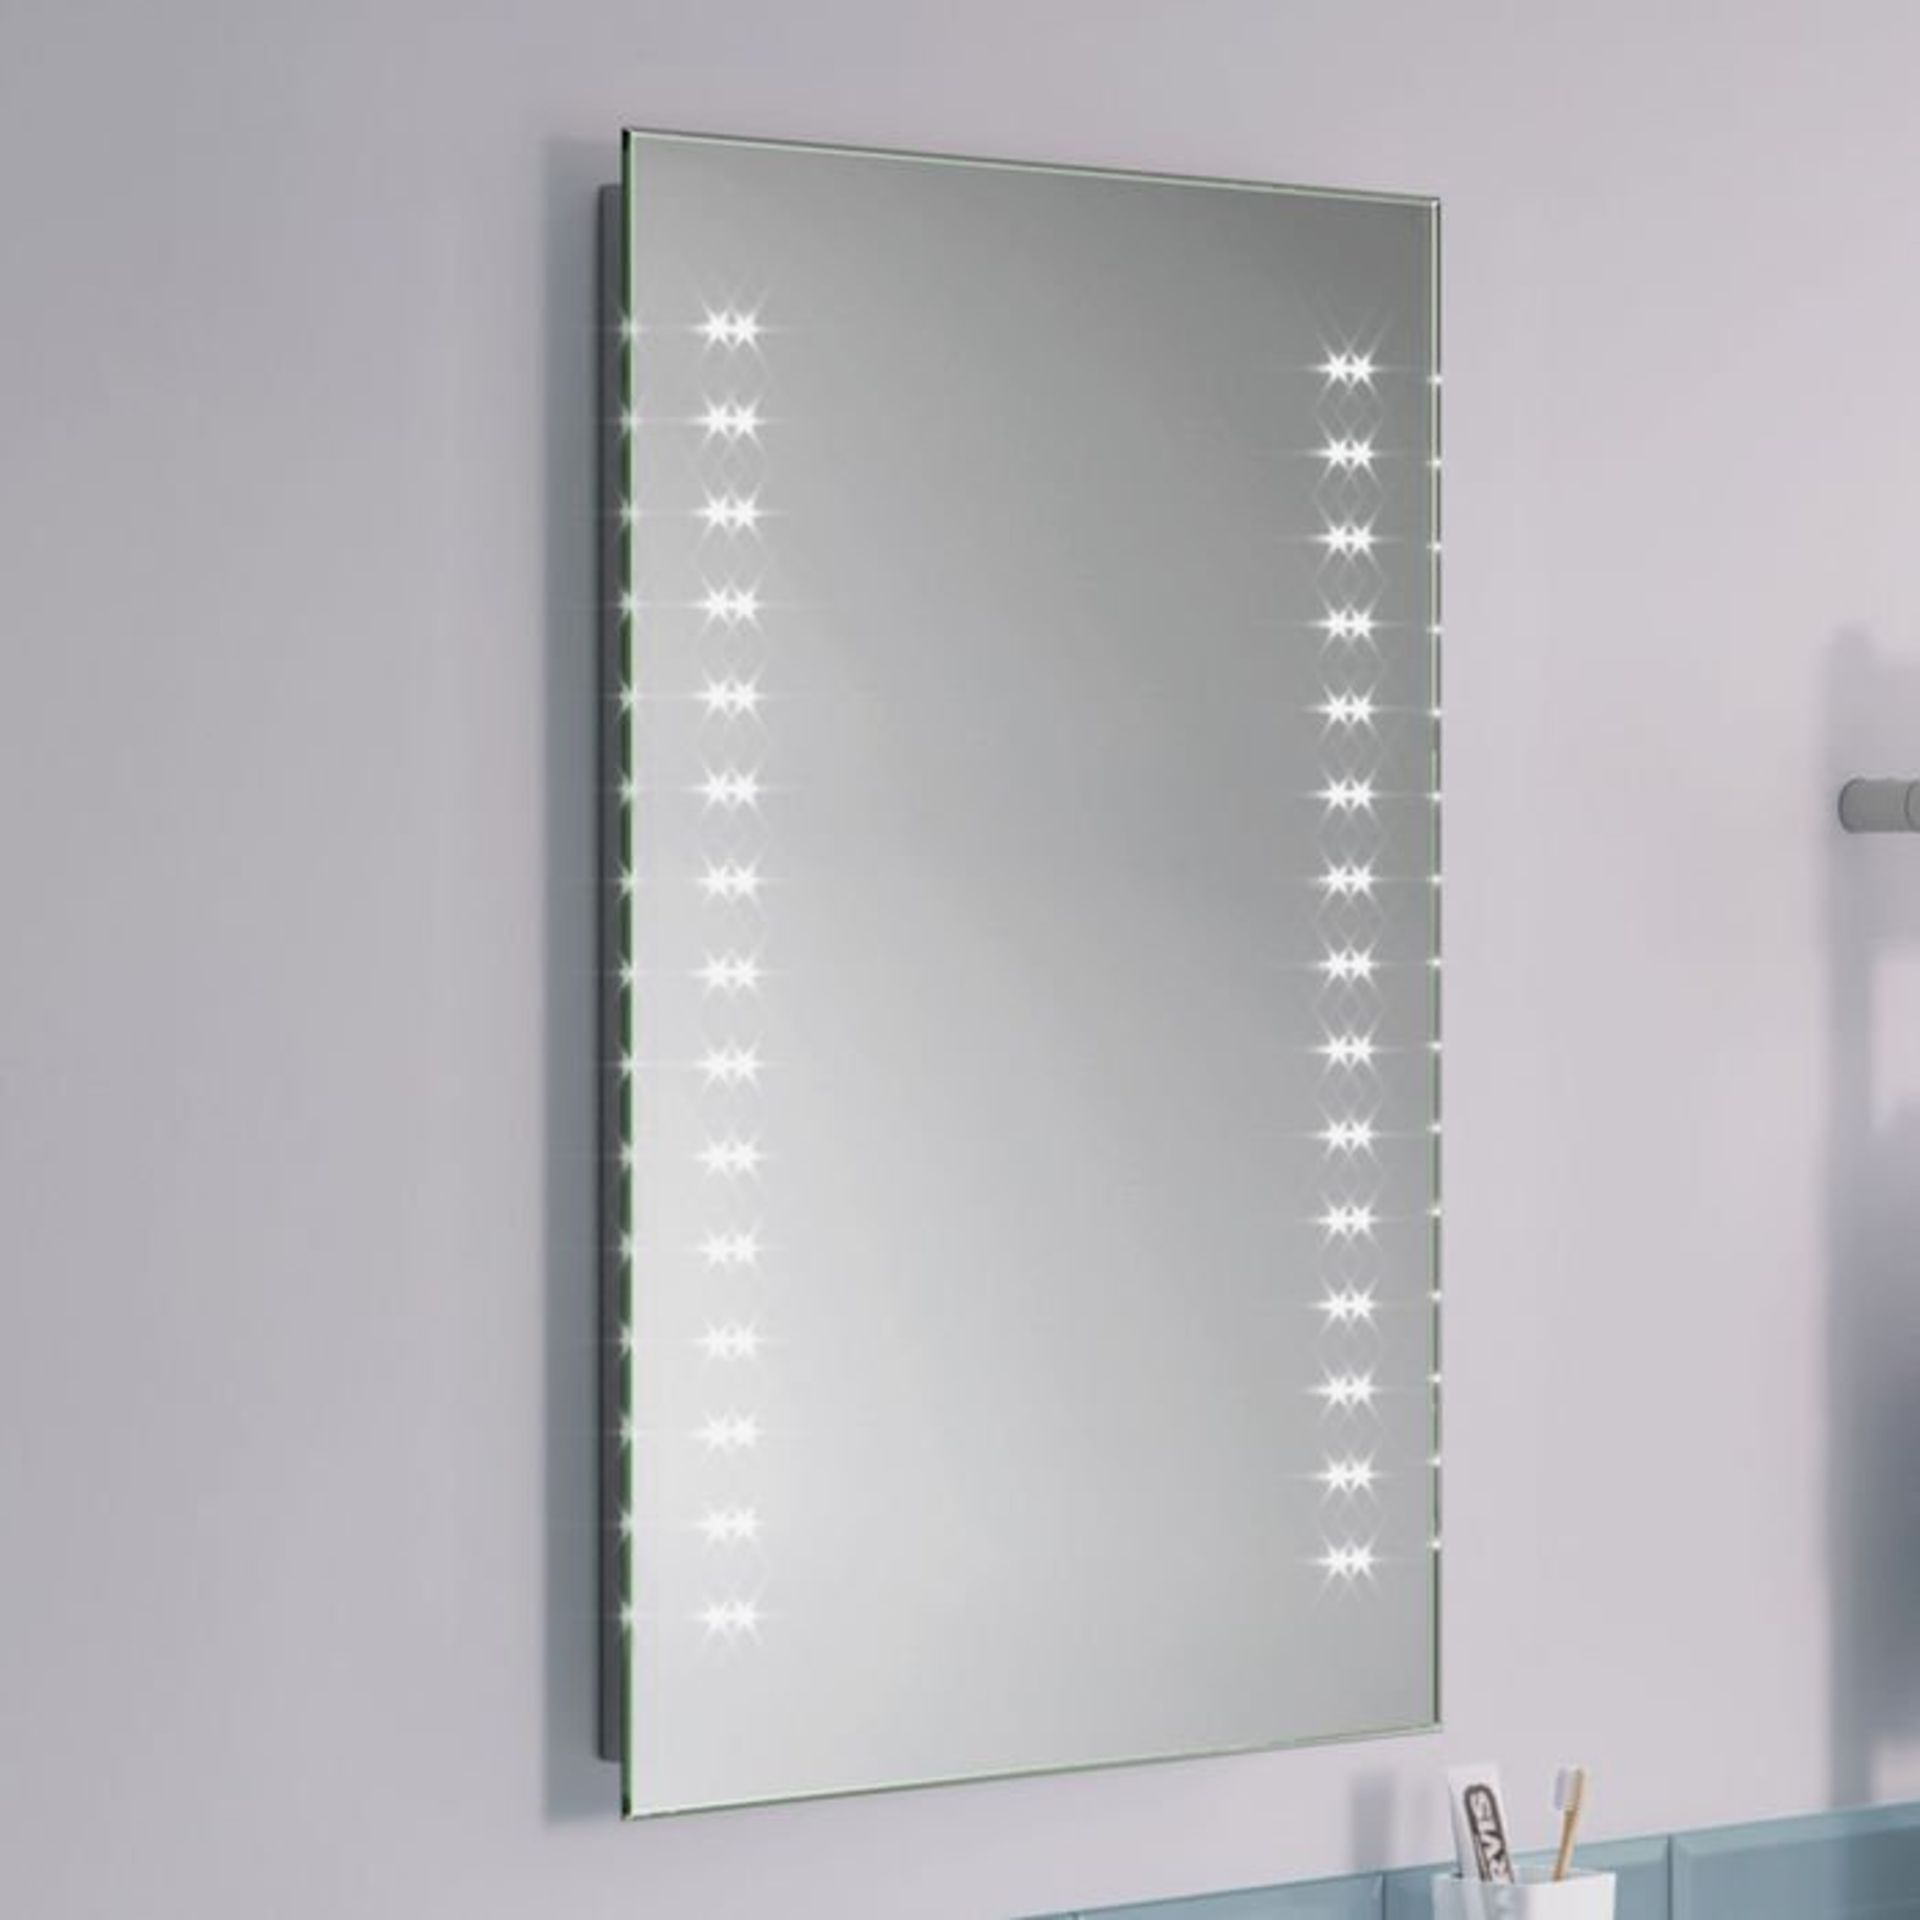 (G125) 500x700mm Galactic LED Mirror - Battery Operated Energy saving controlled On / Off switch - Image 2 of 3